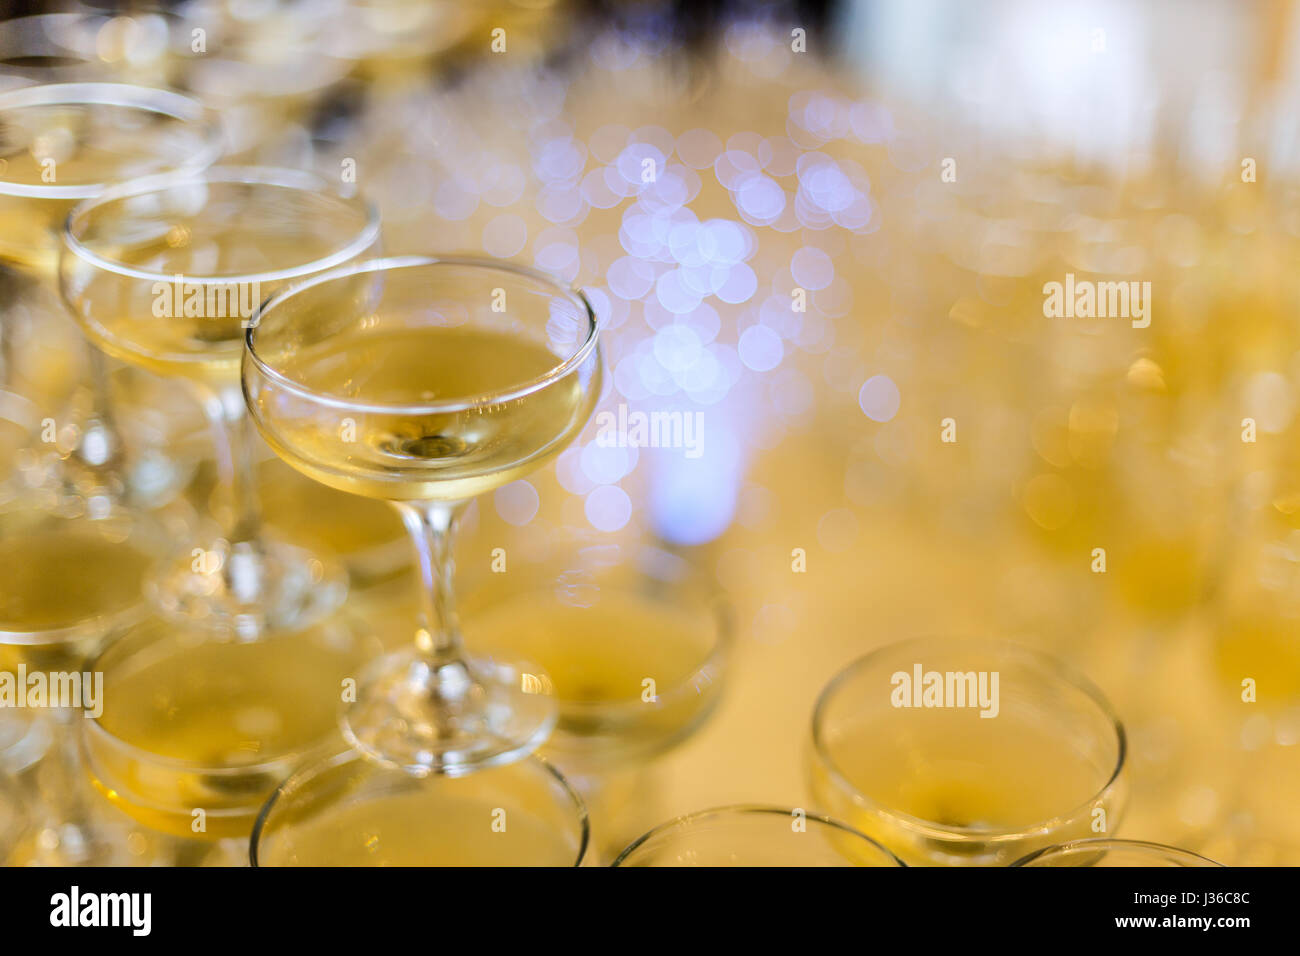 Champagne glasses pyramid on restaurant table Stock Photo